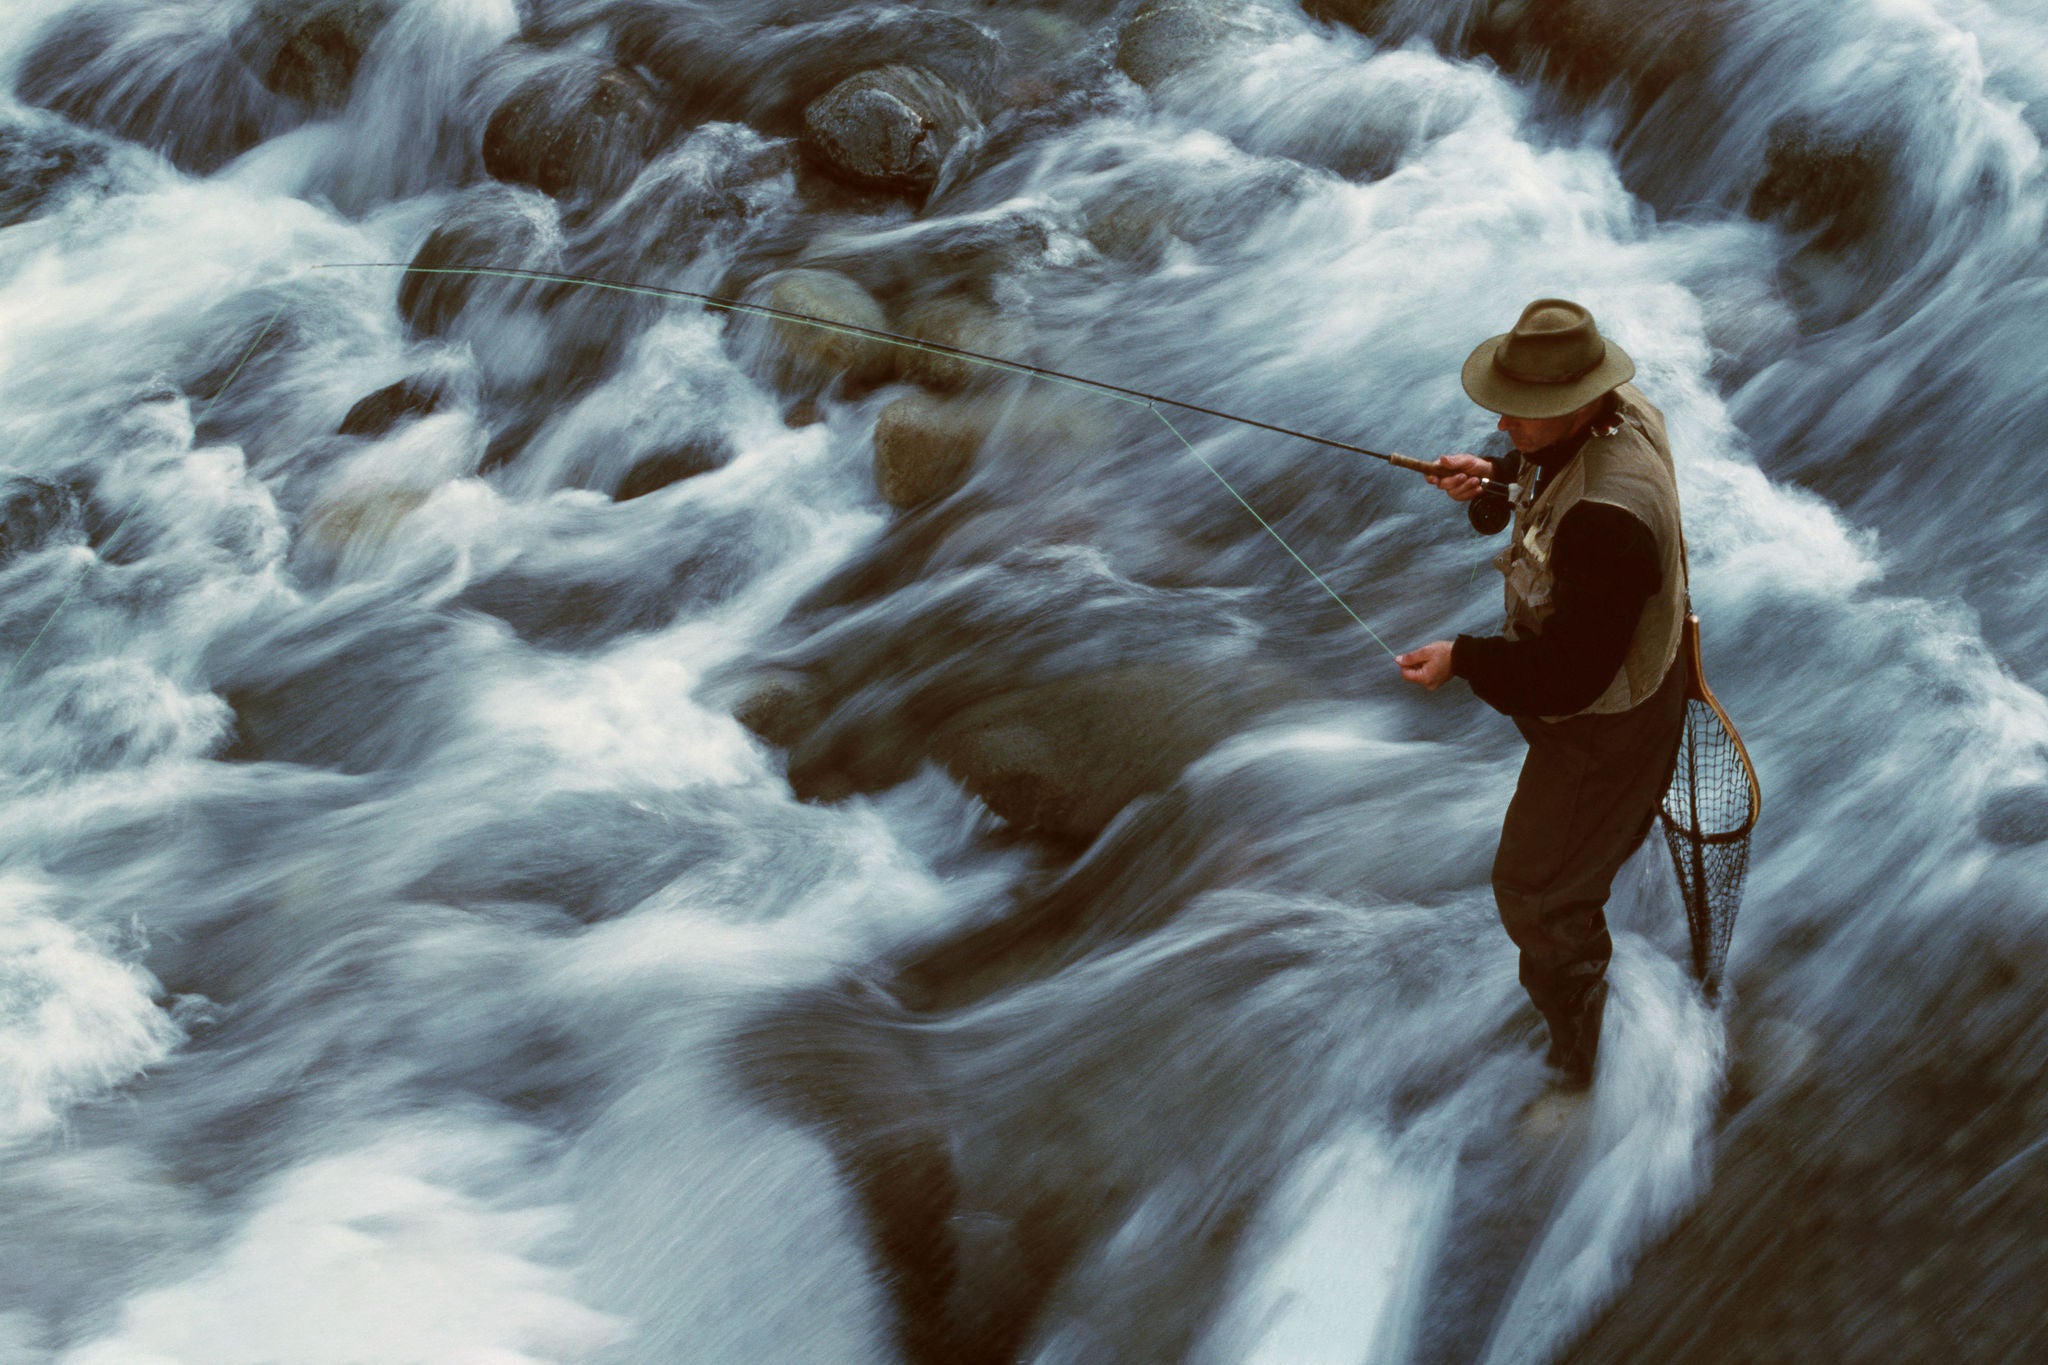 A man stands in a flowing river while fly fishing in Chile, South America.